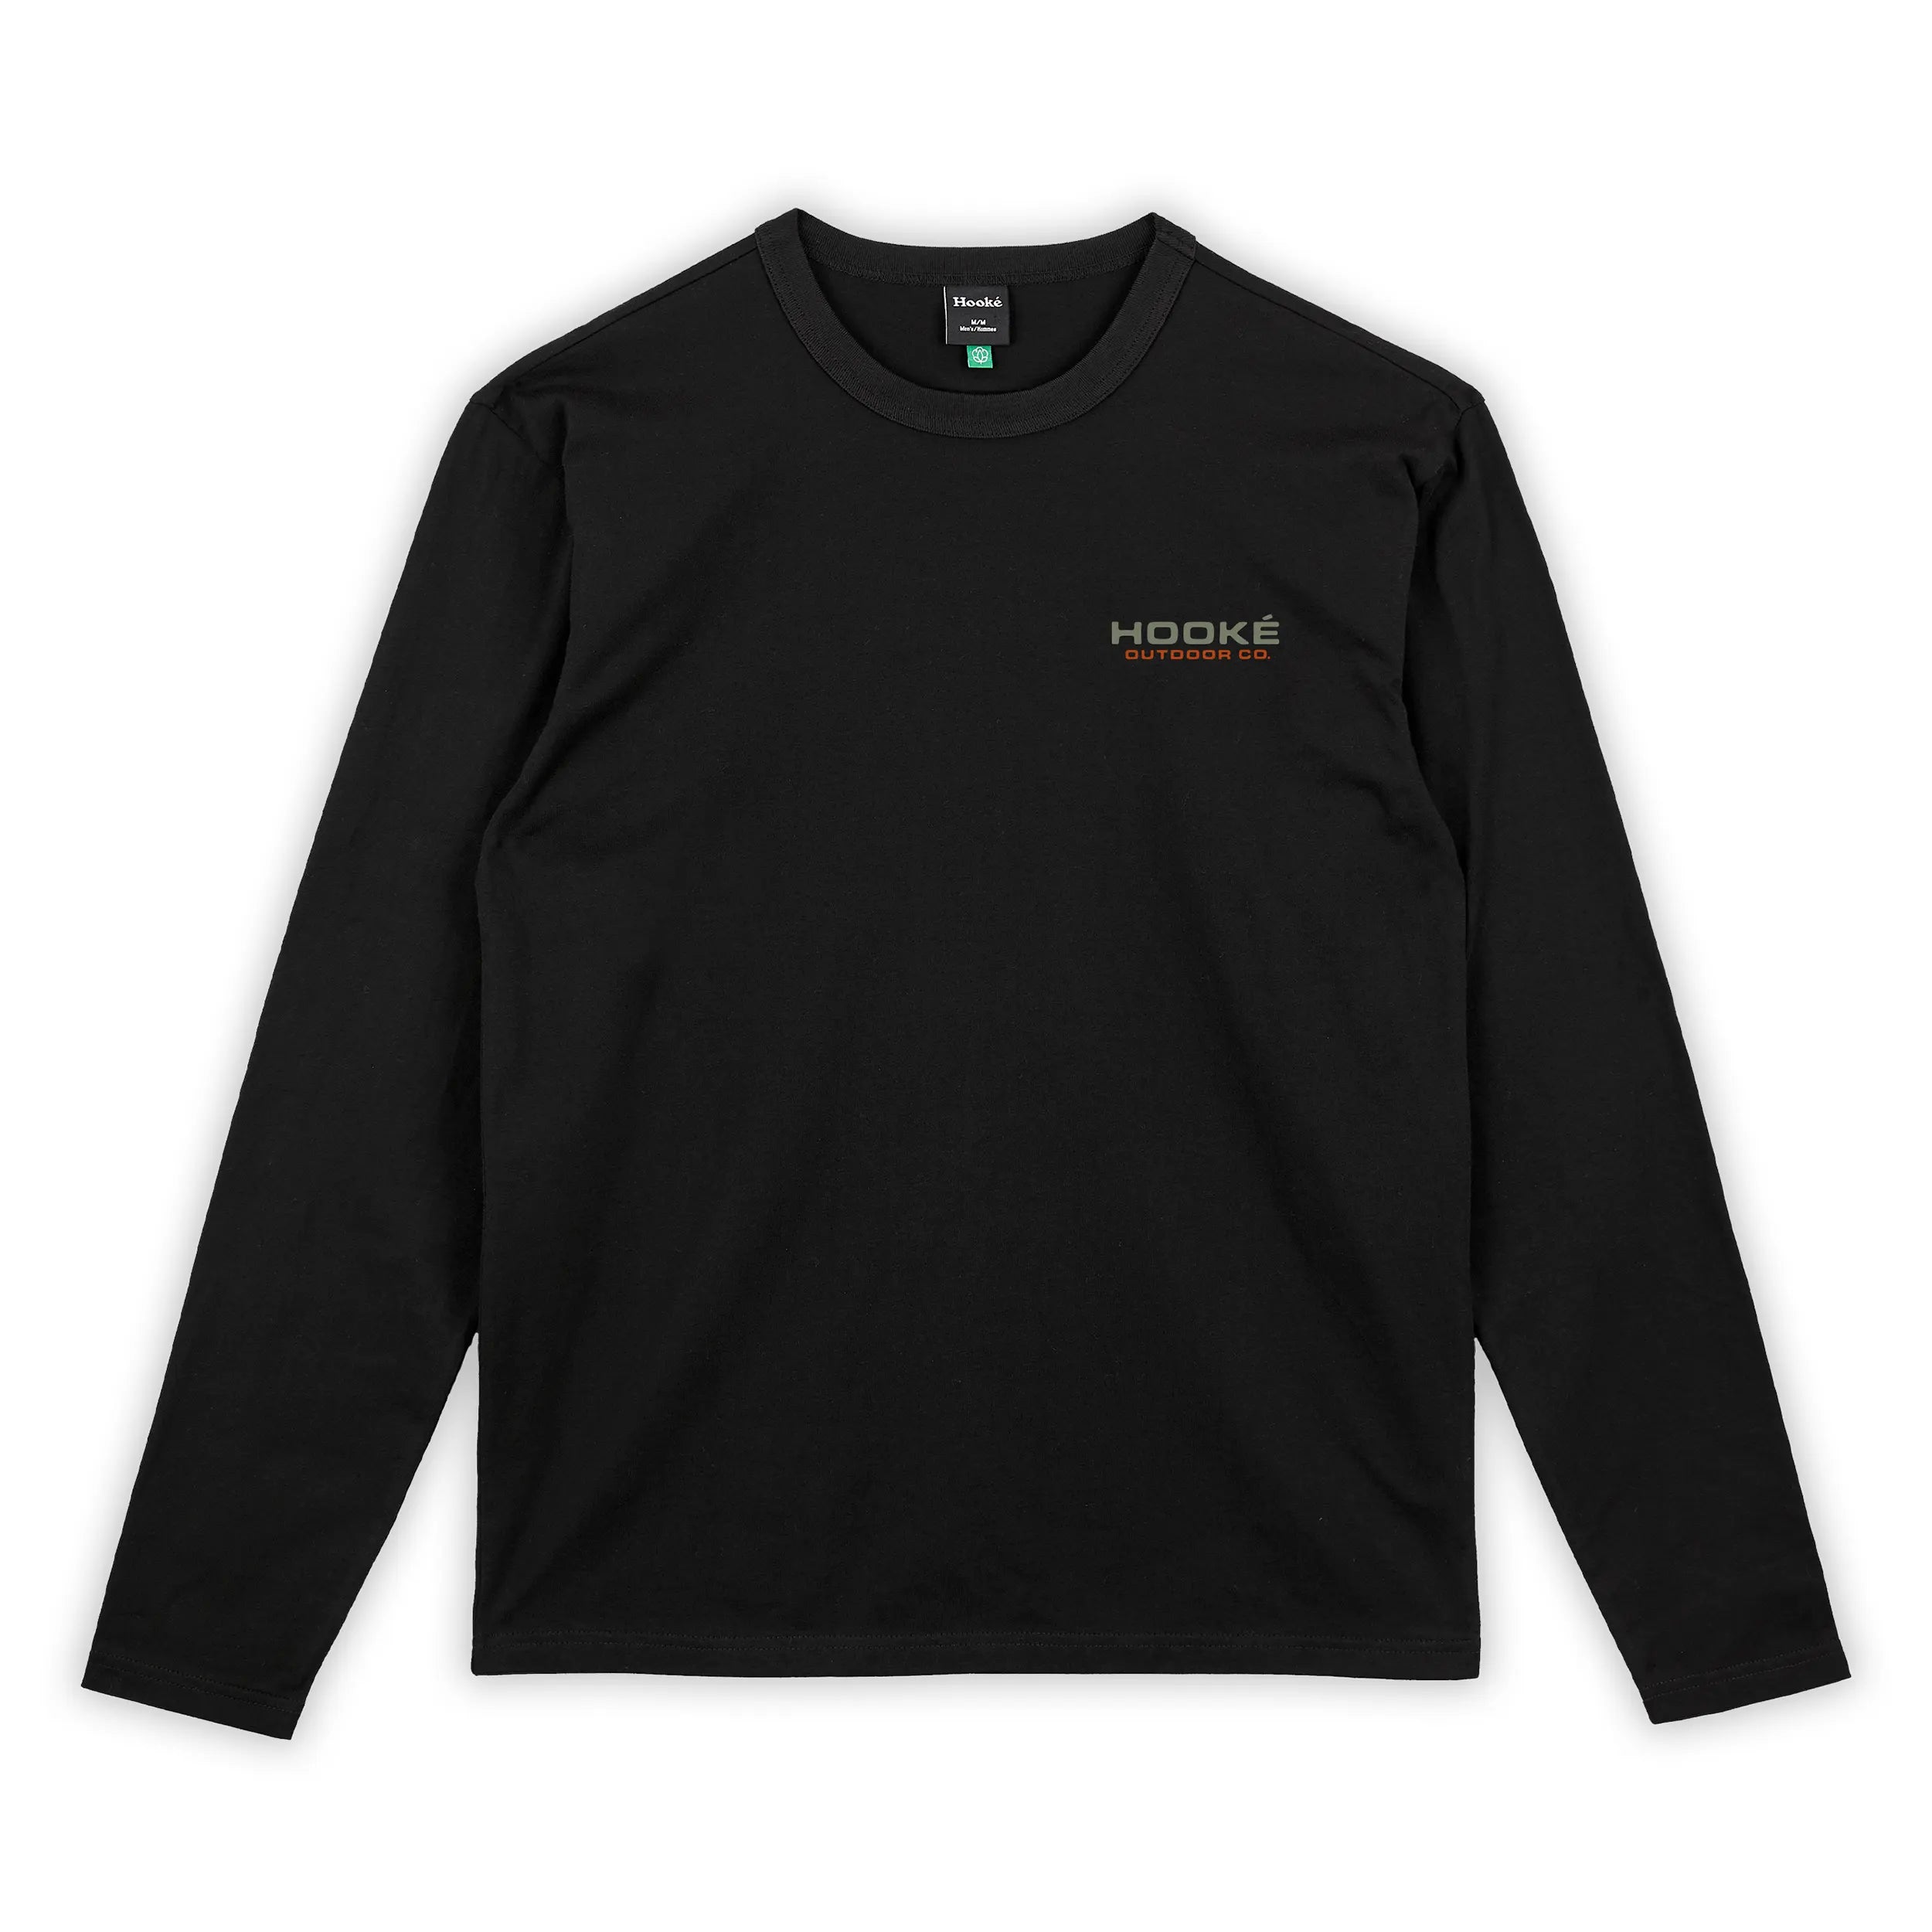 M's Outside by the River Long Sleeve Tee